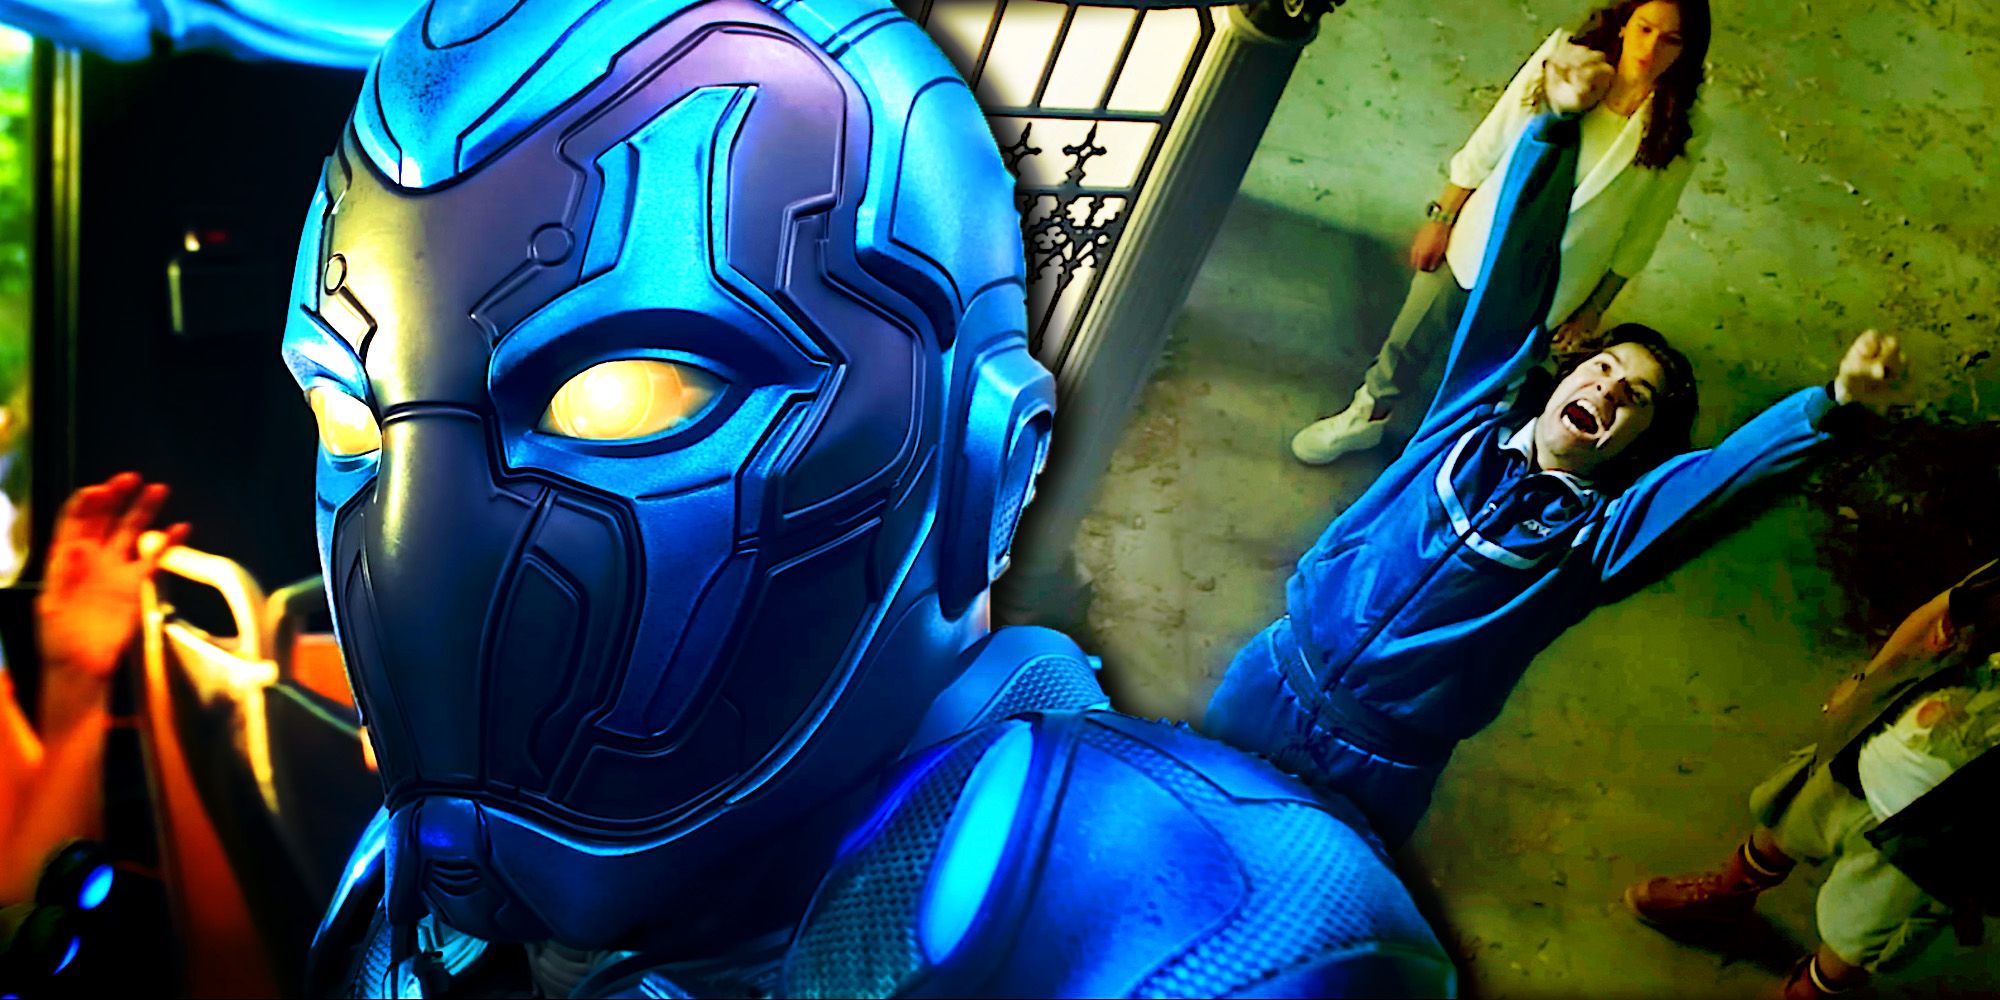 Blue Beetle review: Here's how we ranked new superhero movie